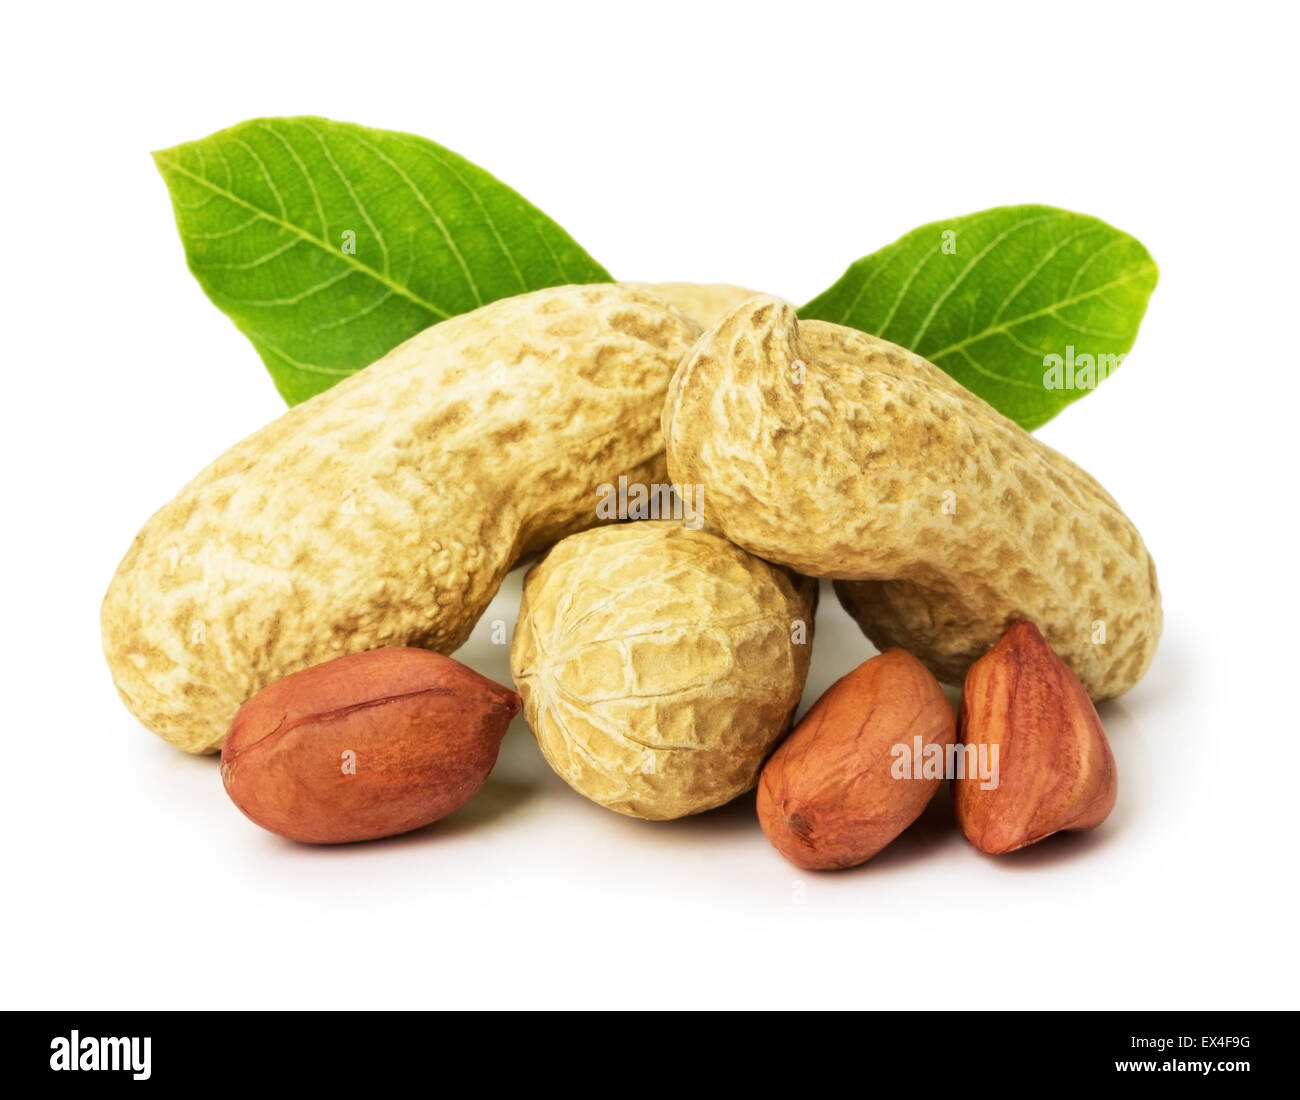 peanut with leaves isolated on white background. Stock Photo